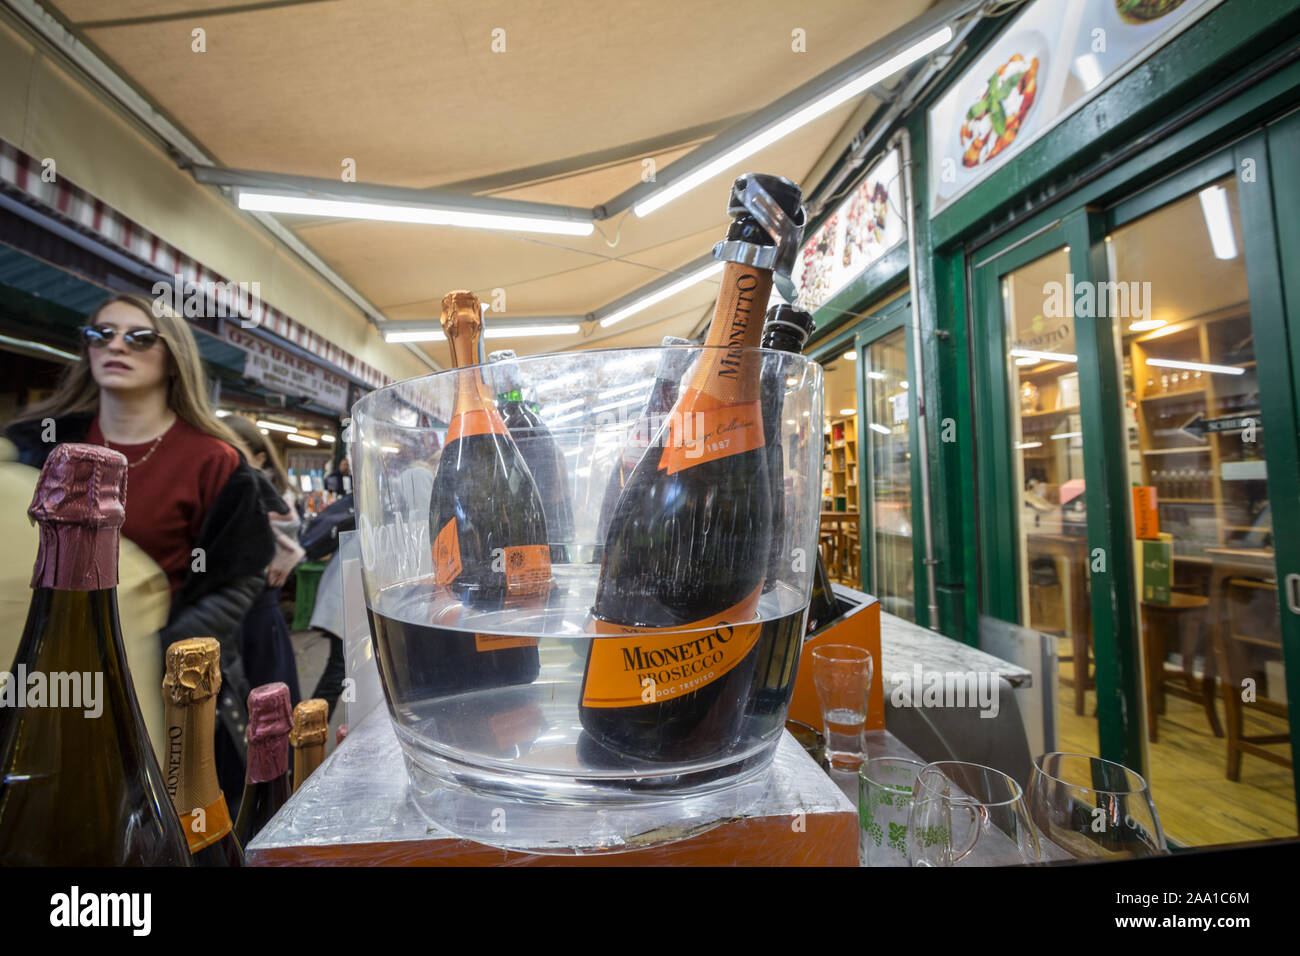 VIENNA, AUSTRIA - NOVEMBER 6, 2019: Prosecco bottles on display in an ice bucket in a Vienna market with people tasting the wine behind. Prosecco is a Stock Photo